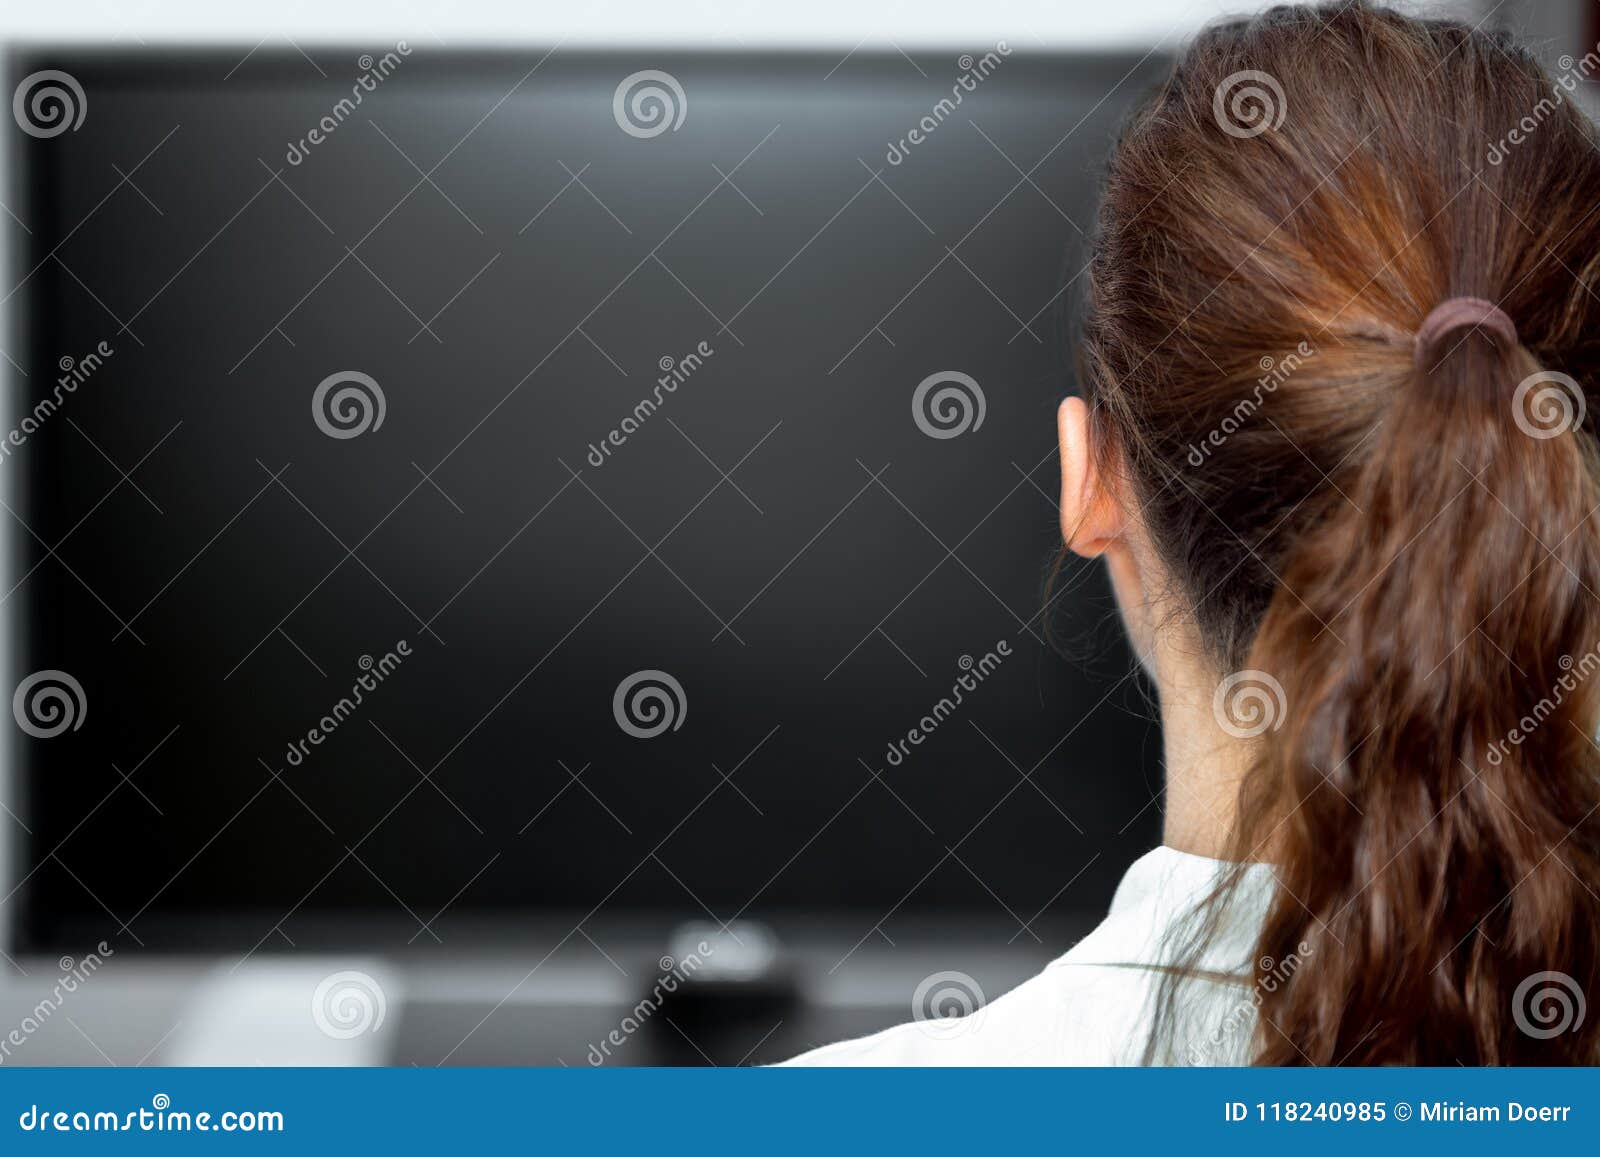 young woman sitting in front of a black monitor or tv, backview